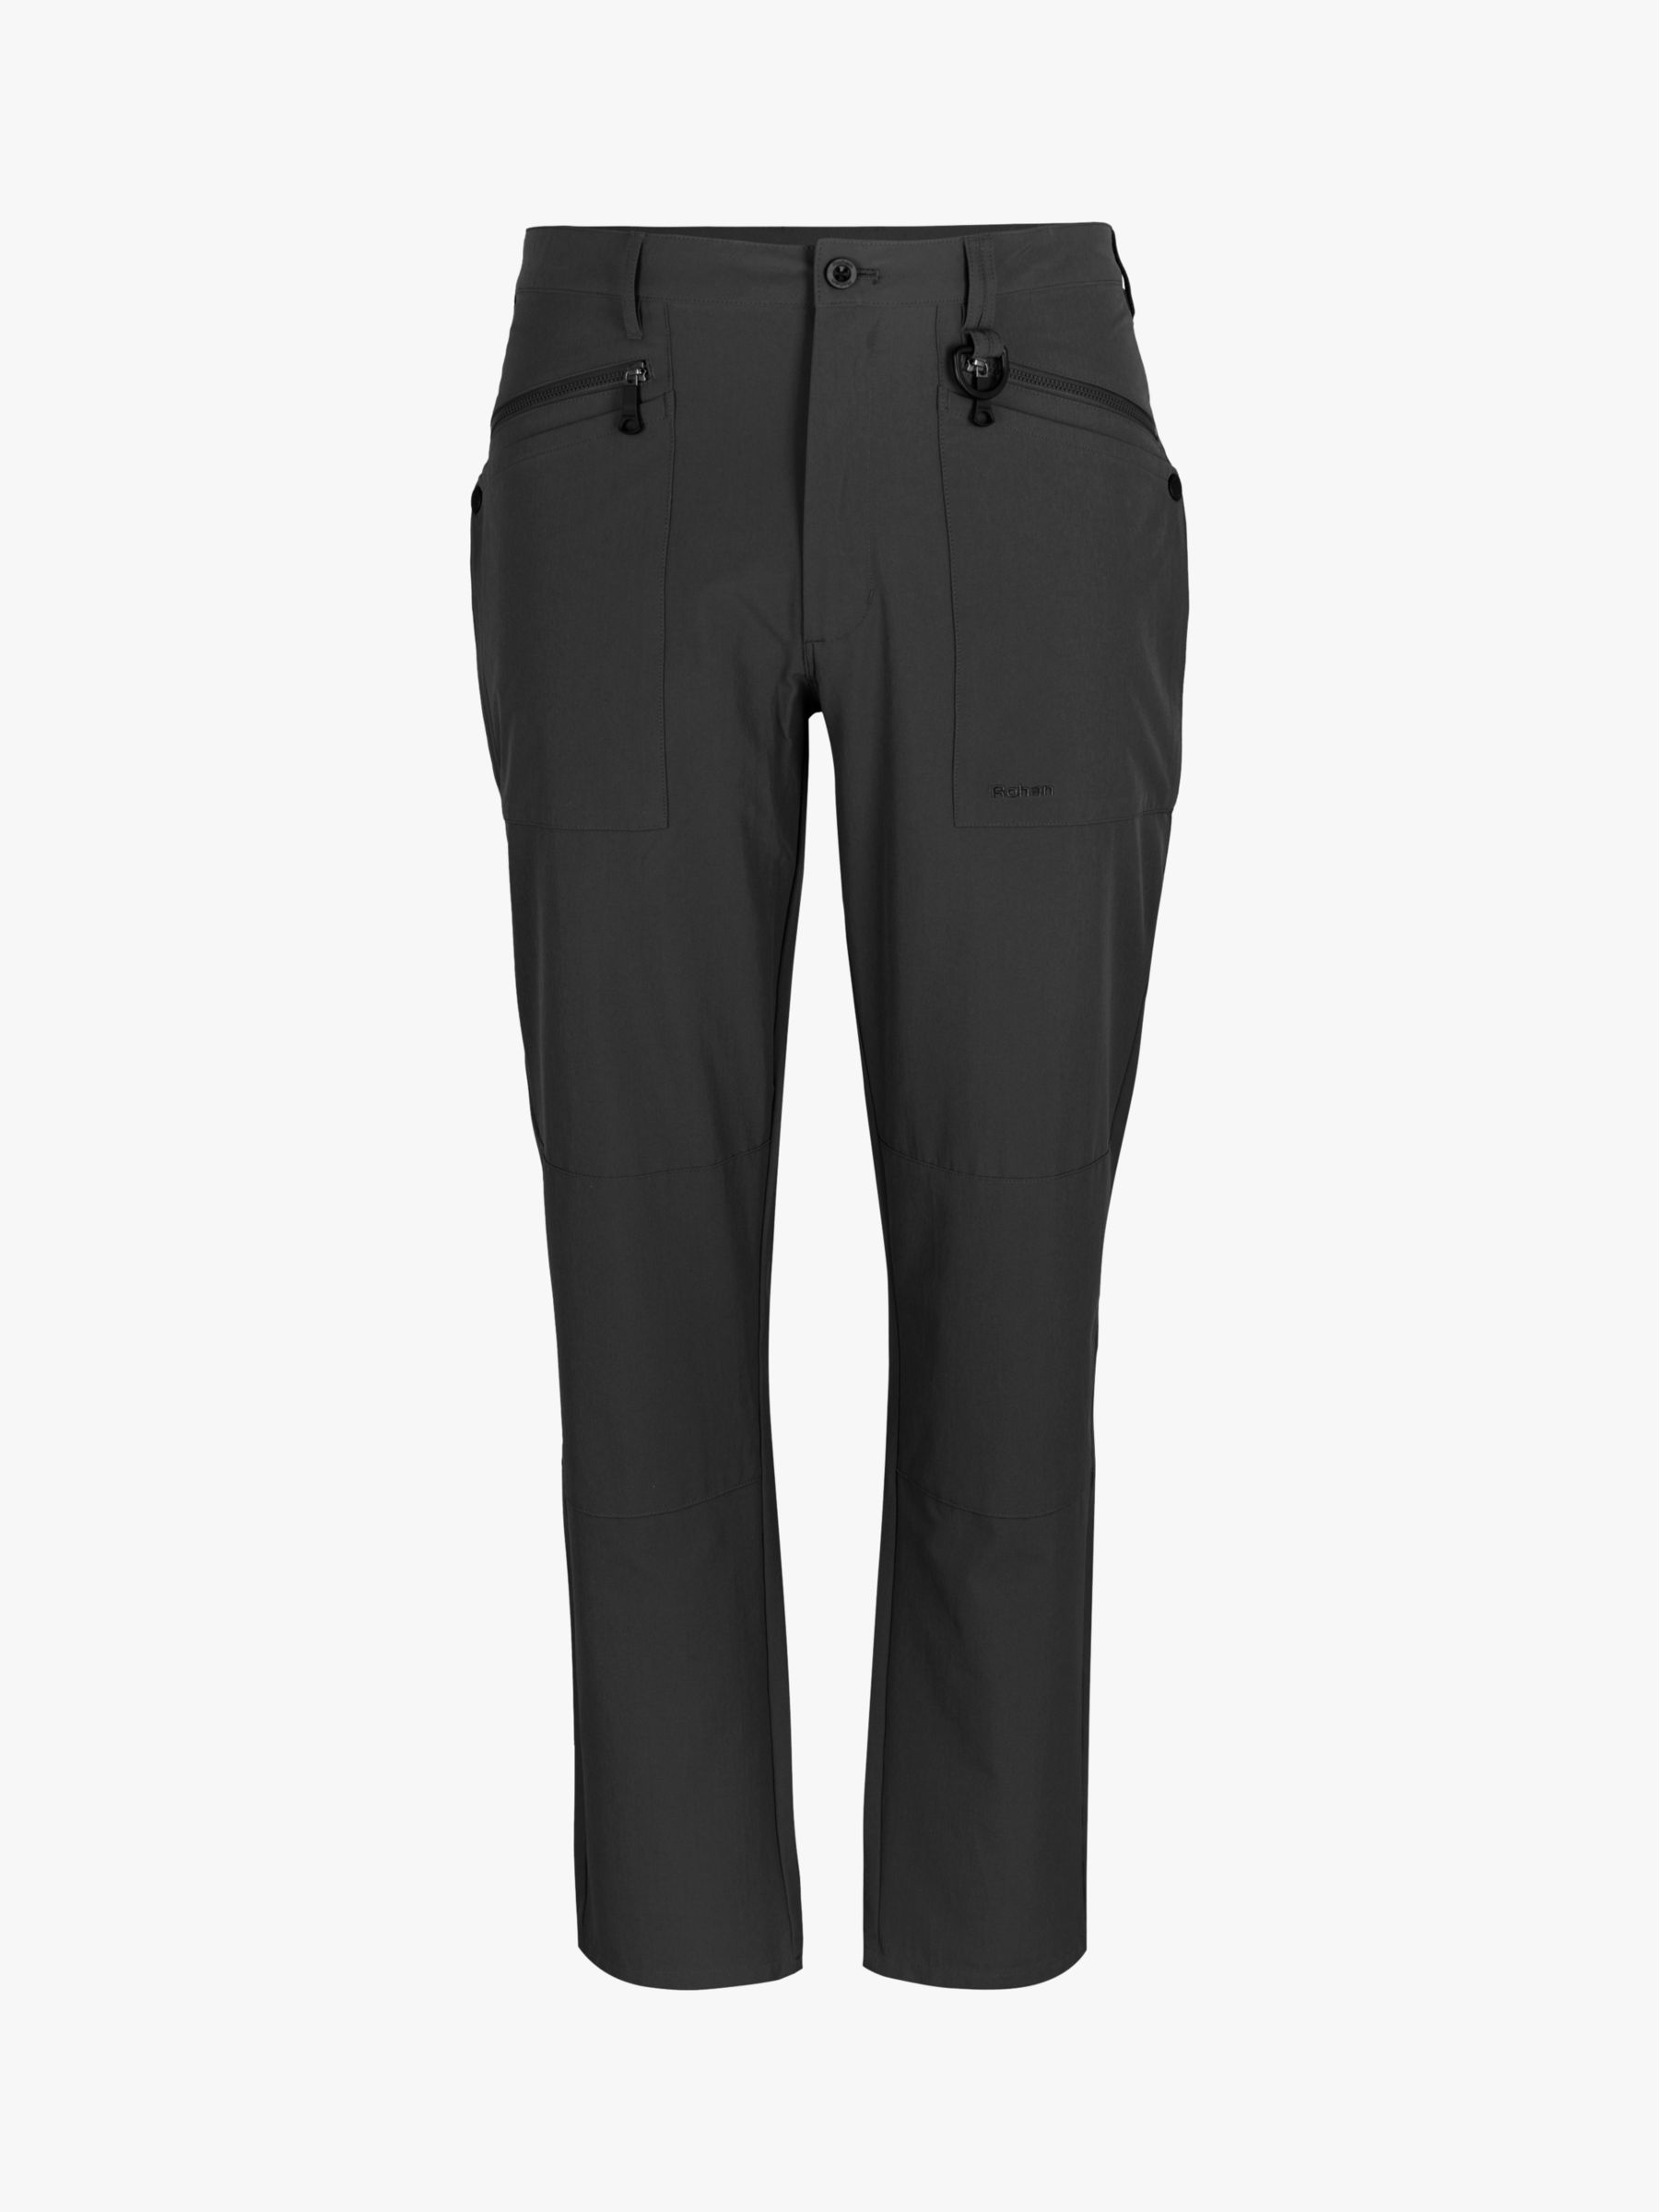 Rohan Stretch Bags Outdoor Trousers, Black, 16R